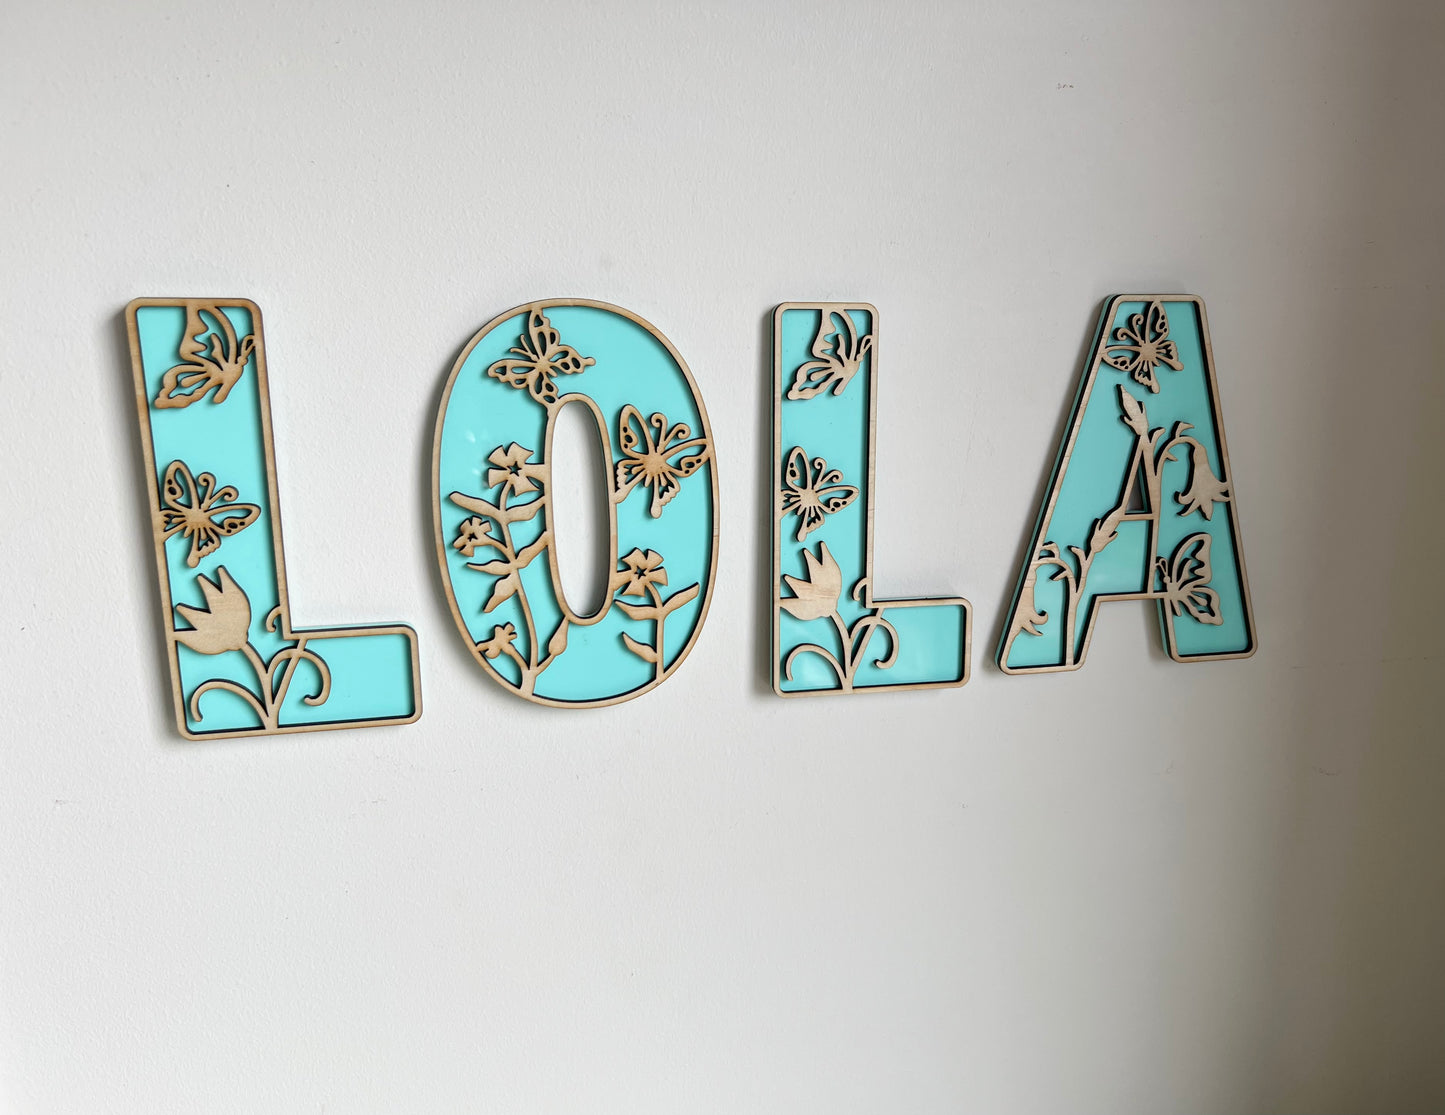 Themed letters - 15cm